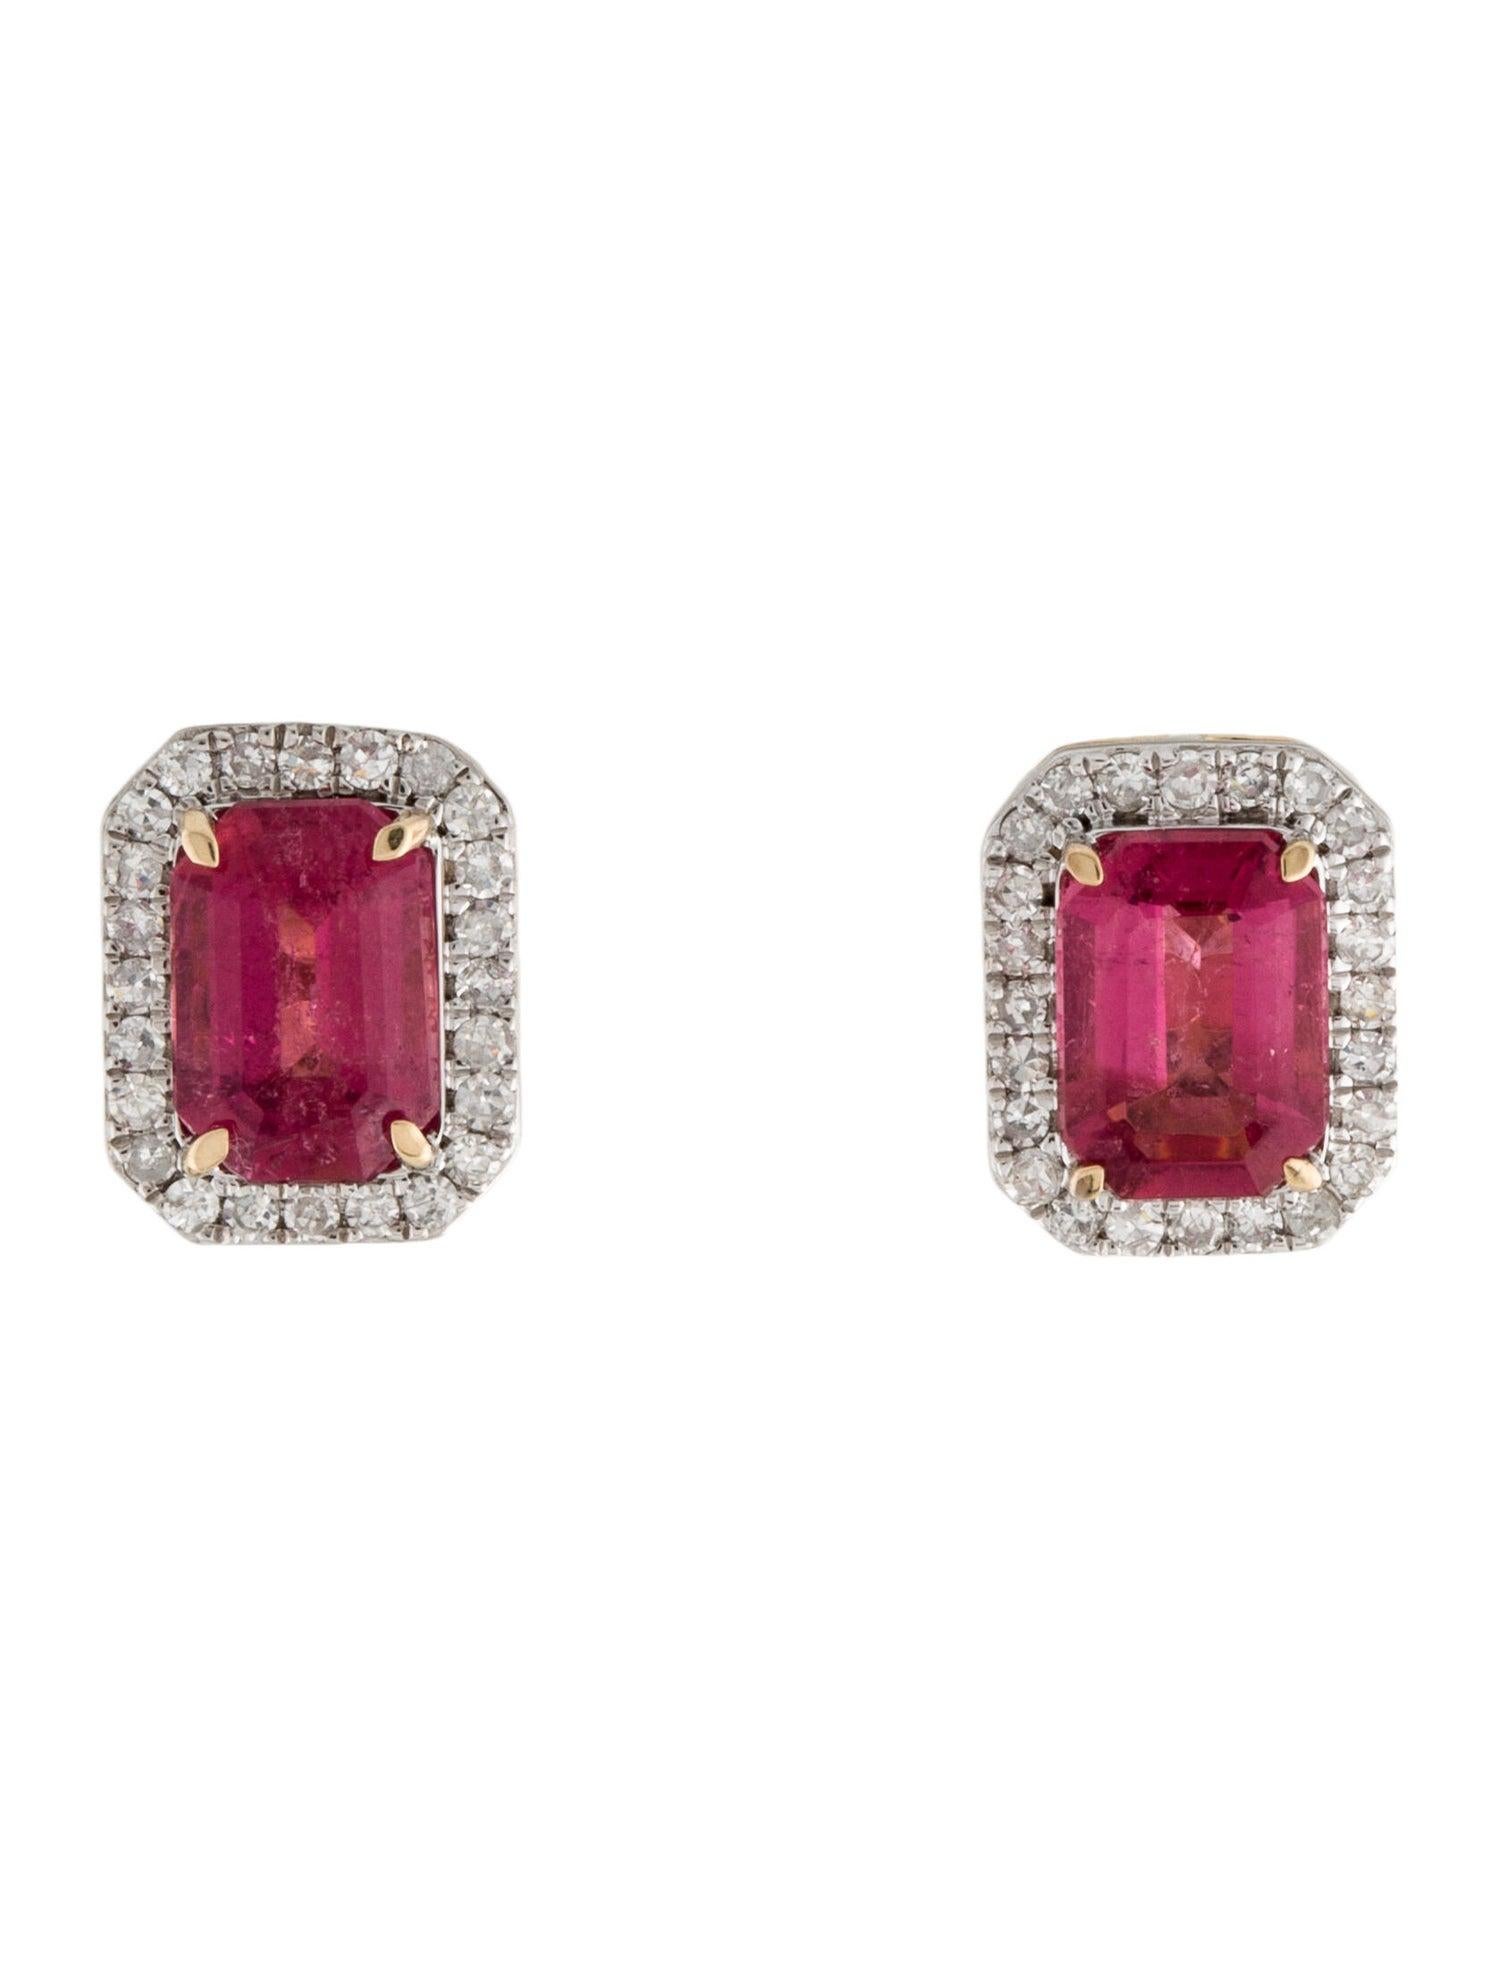 Indulge in the captivating allure of our Radiant Rose Rubellite Earrings from the Vibrant Pink Treasures collection. Inspired by the mesmerizing depths of the sea and the vibrant bloom of a rose, these earrings pay homage to the exceptional beauty